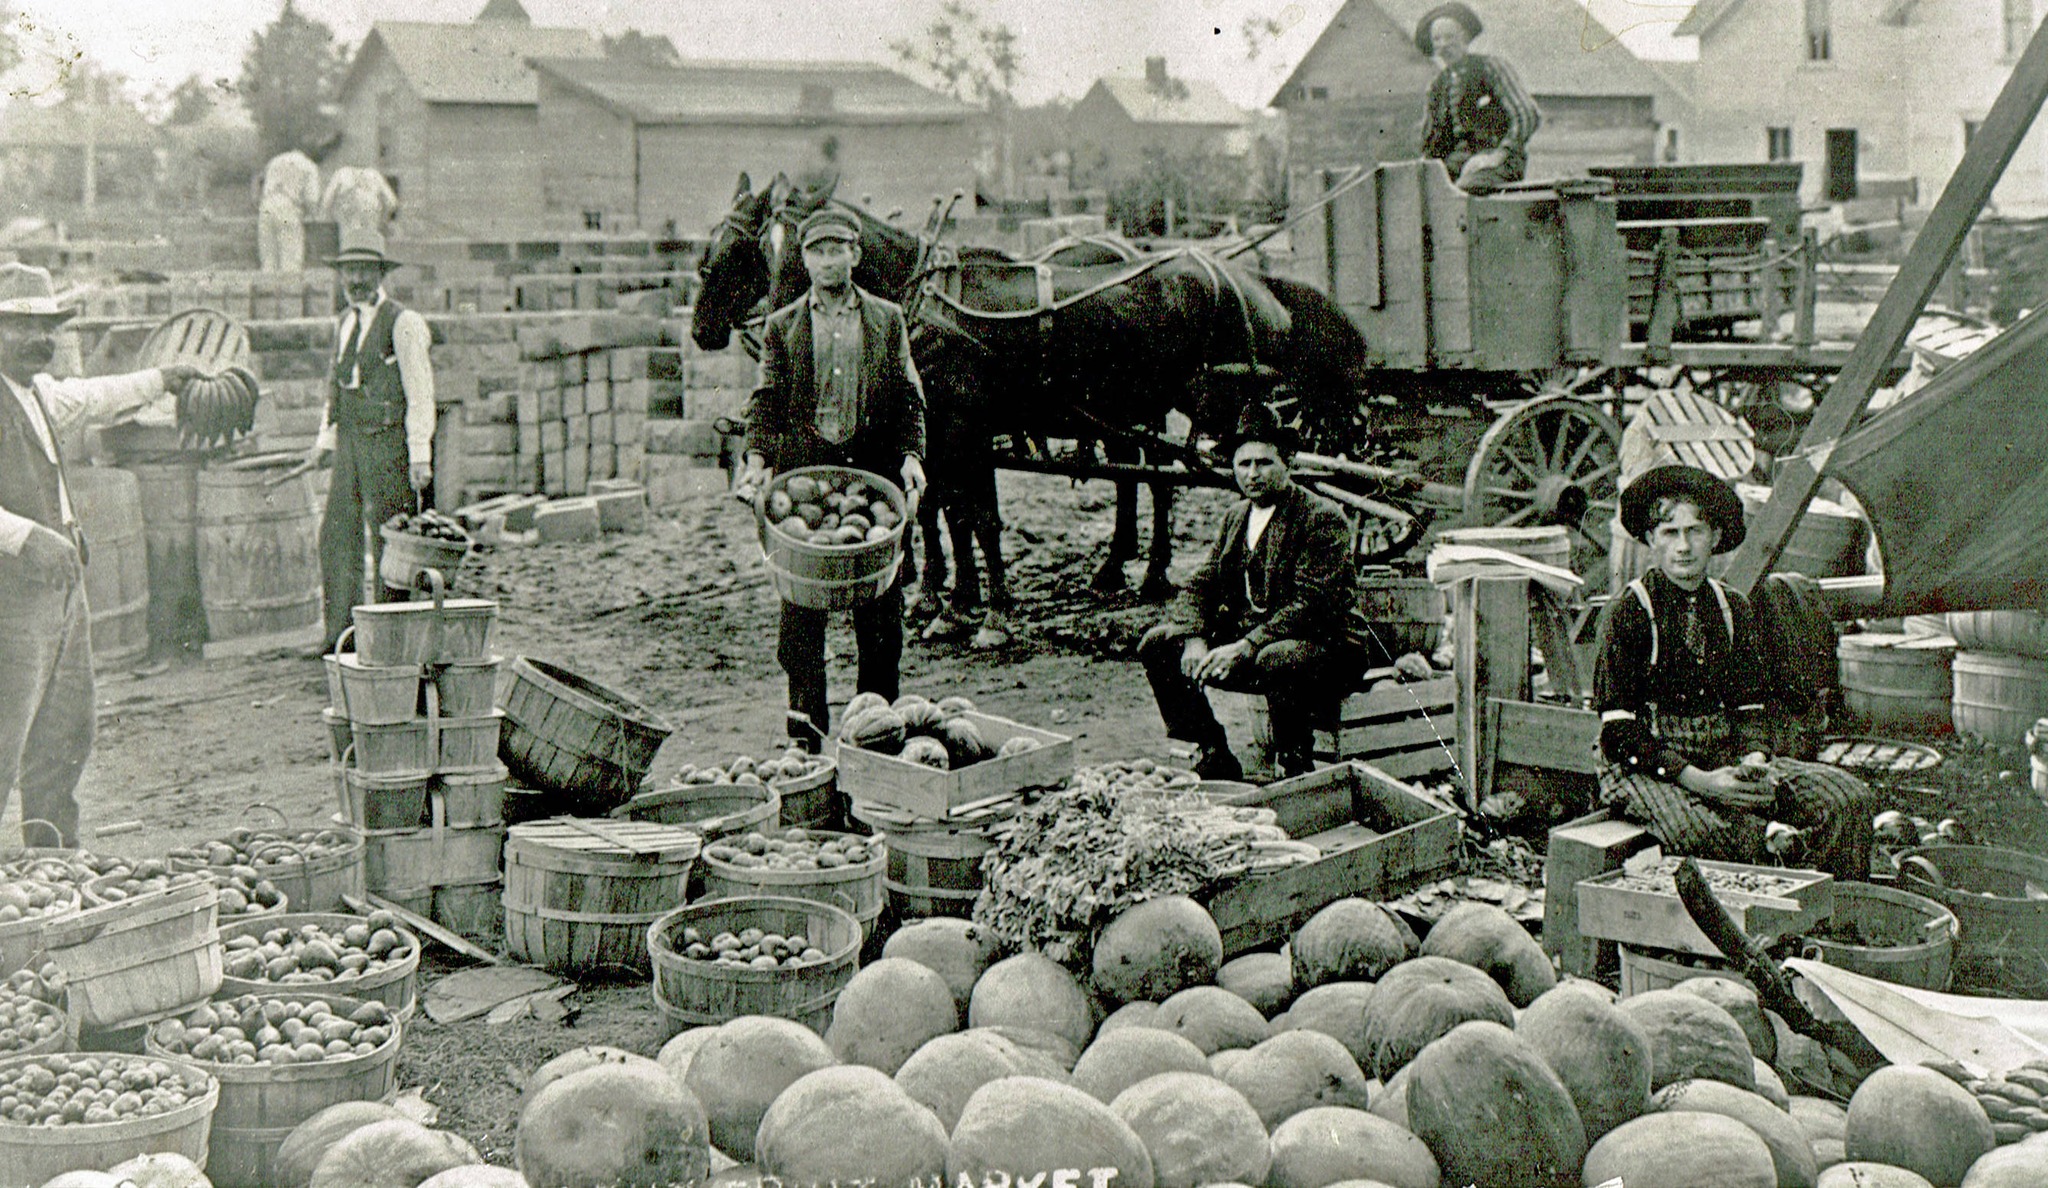 A farmer’s market in progress behind the Opera House on the South side of Washington Street. ca. 1900-1910.